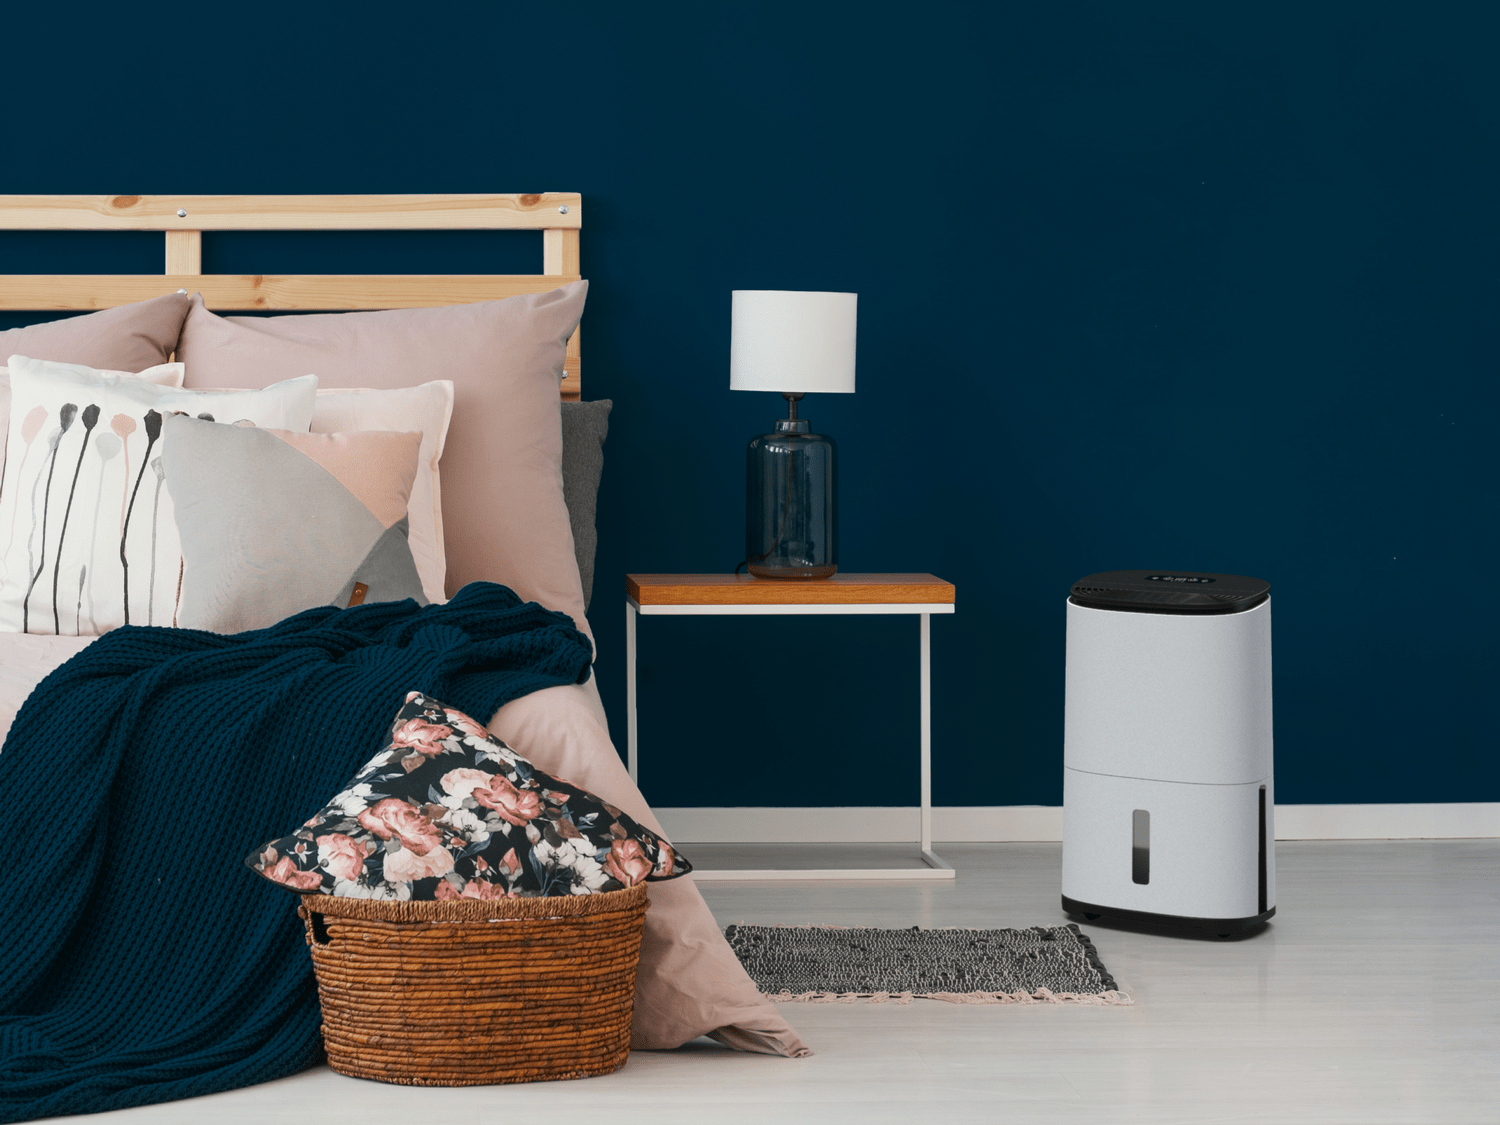 A lifestyle photo showing a Meaco Arete dehumidifier in a bedroom setting